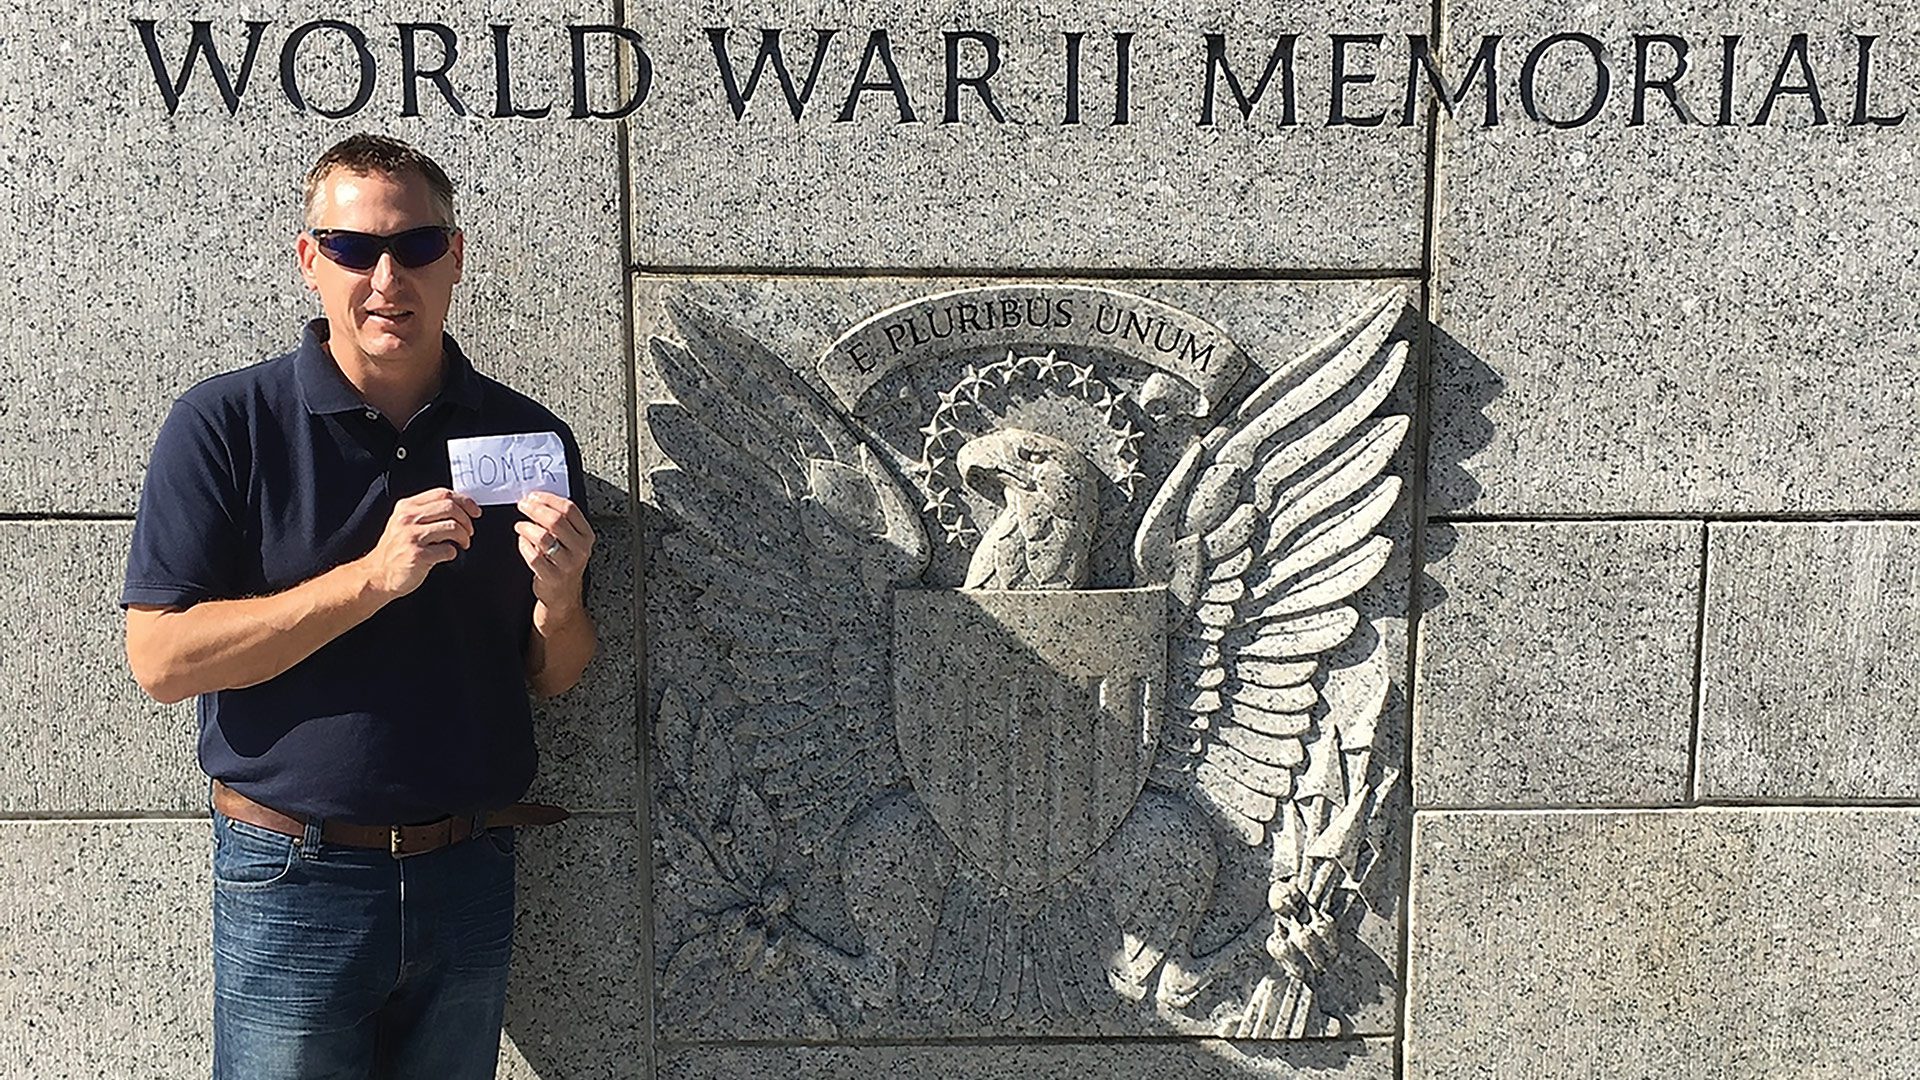 Dr. Mark Kenton holds up a card with the name ‘Homer’ on it at the World War II memorial